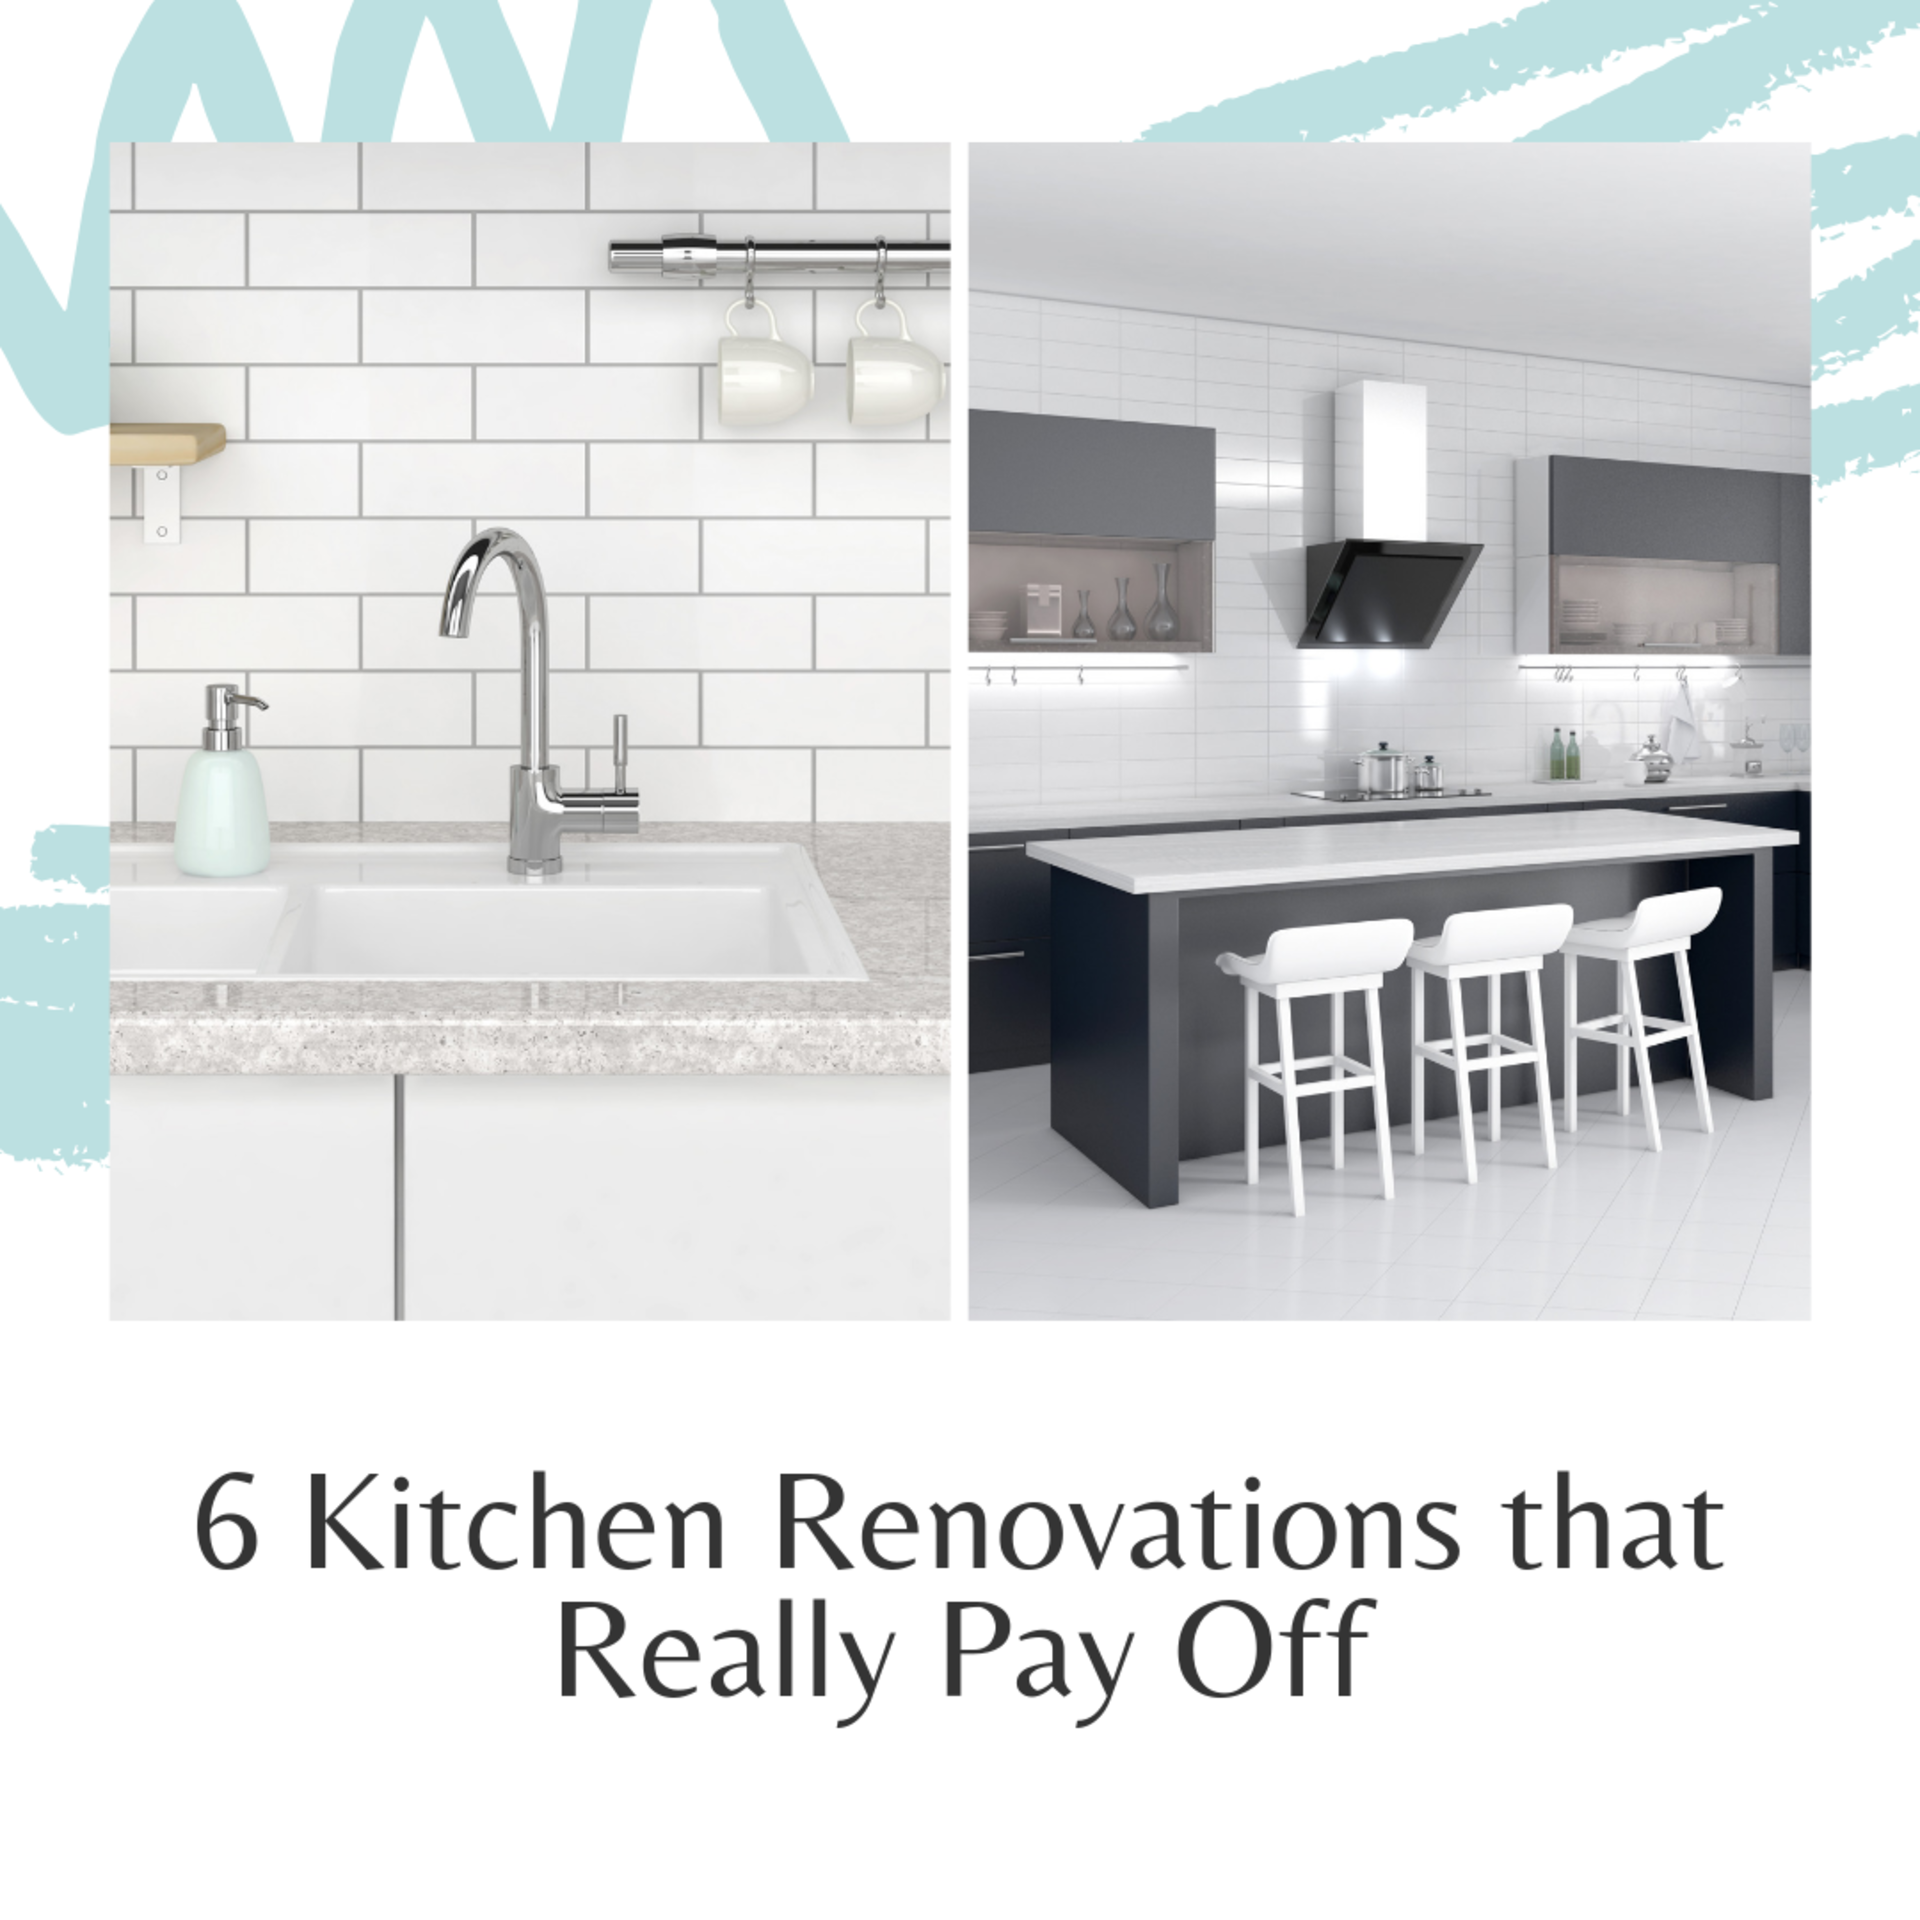 6 Kitchen Renovations that Really Pay Off